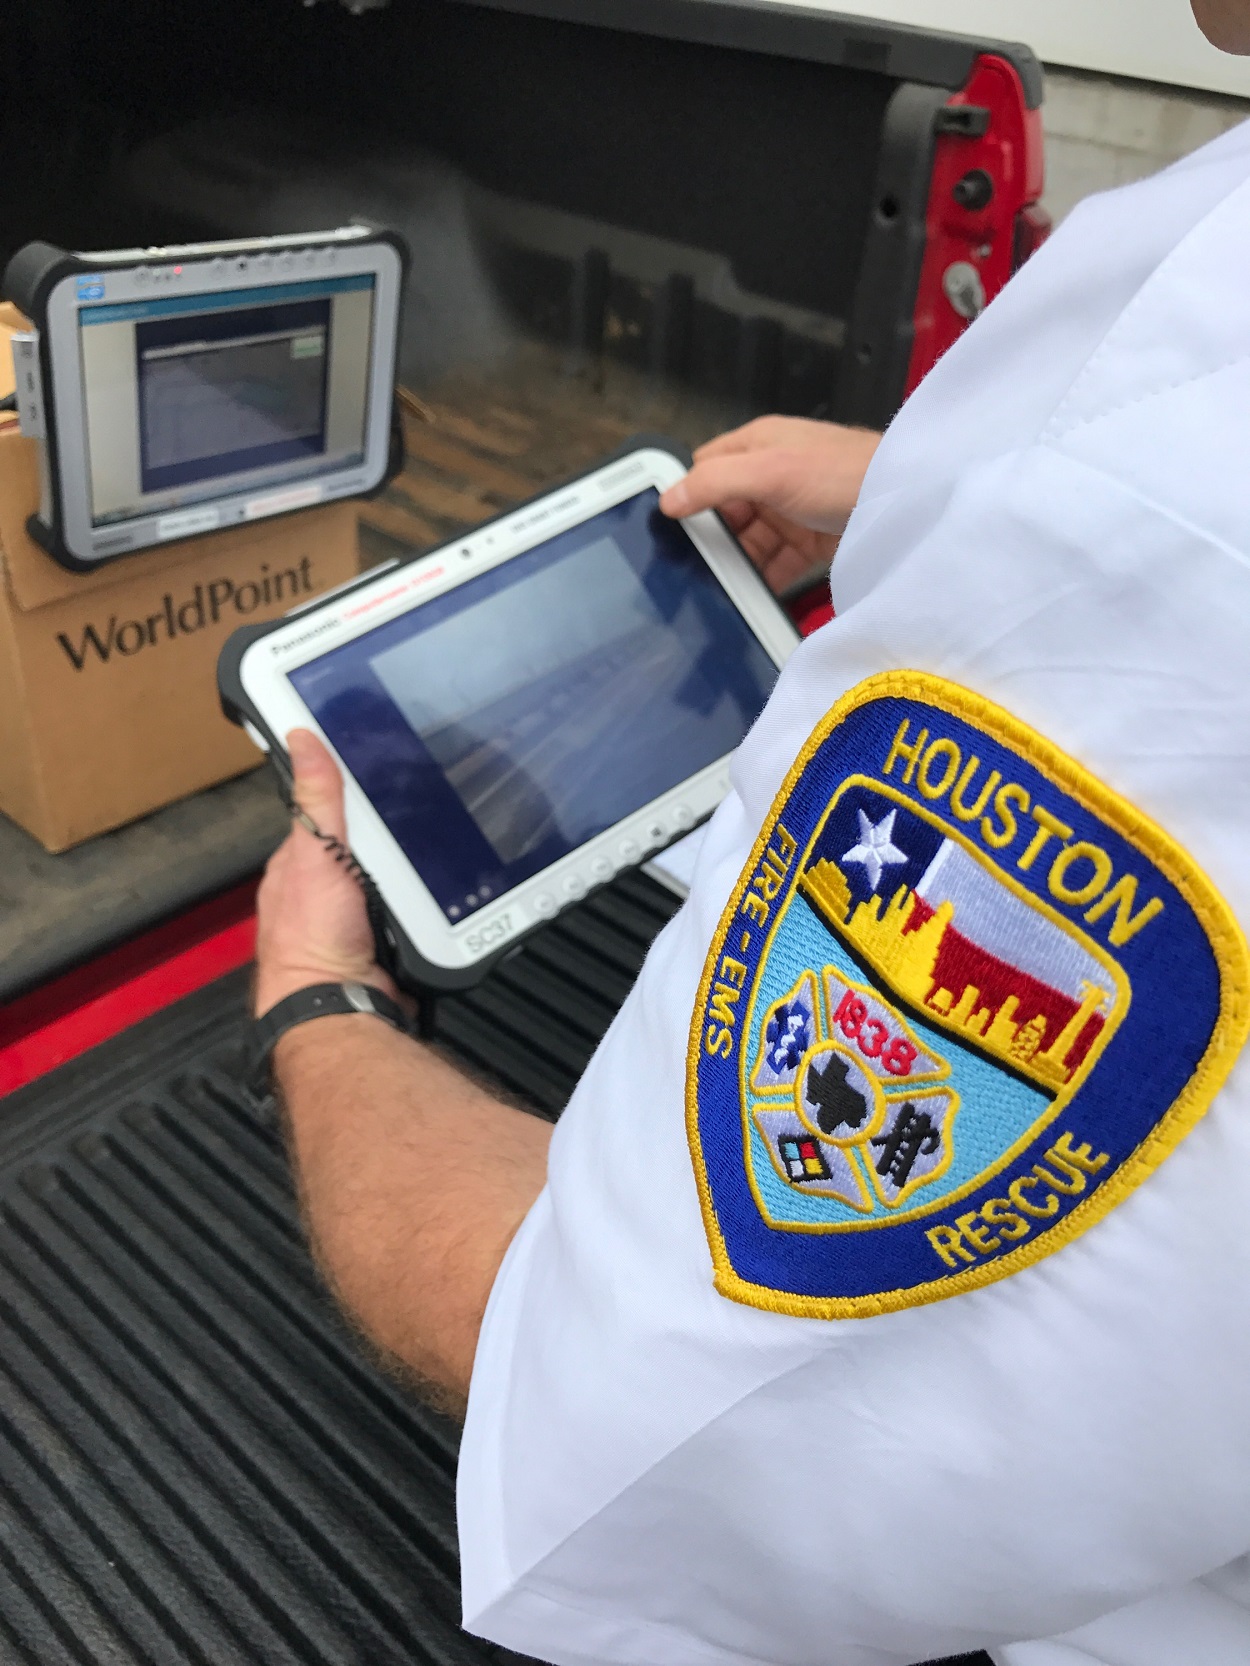 Fire-EMS responder looking at tablet with picture of highway on the screen. Fire-EMS responder's shoulder patch reads: "Houston"; "Fire-EMS"; "Rescue."